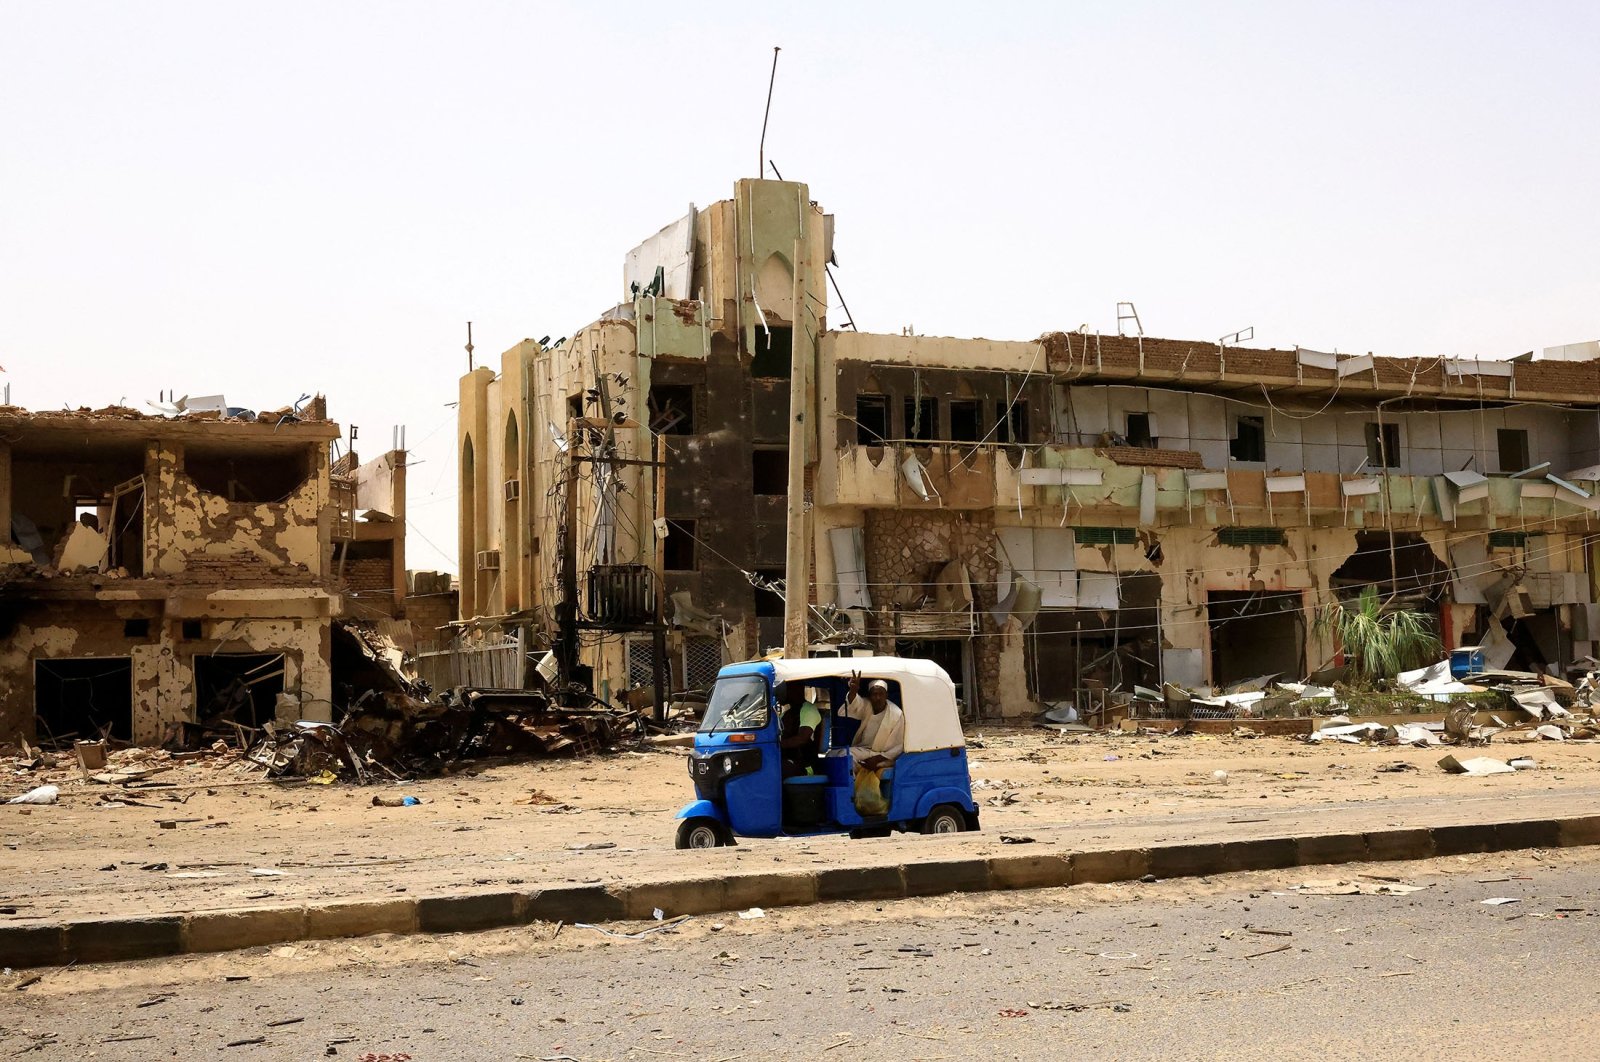 People pass by damaged cars and buildings at the central market during clashes between the paramilitary Rapid Support Forces and the army in Khartoum, Sudan, April 27, 2023. (Reuters Photo)